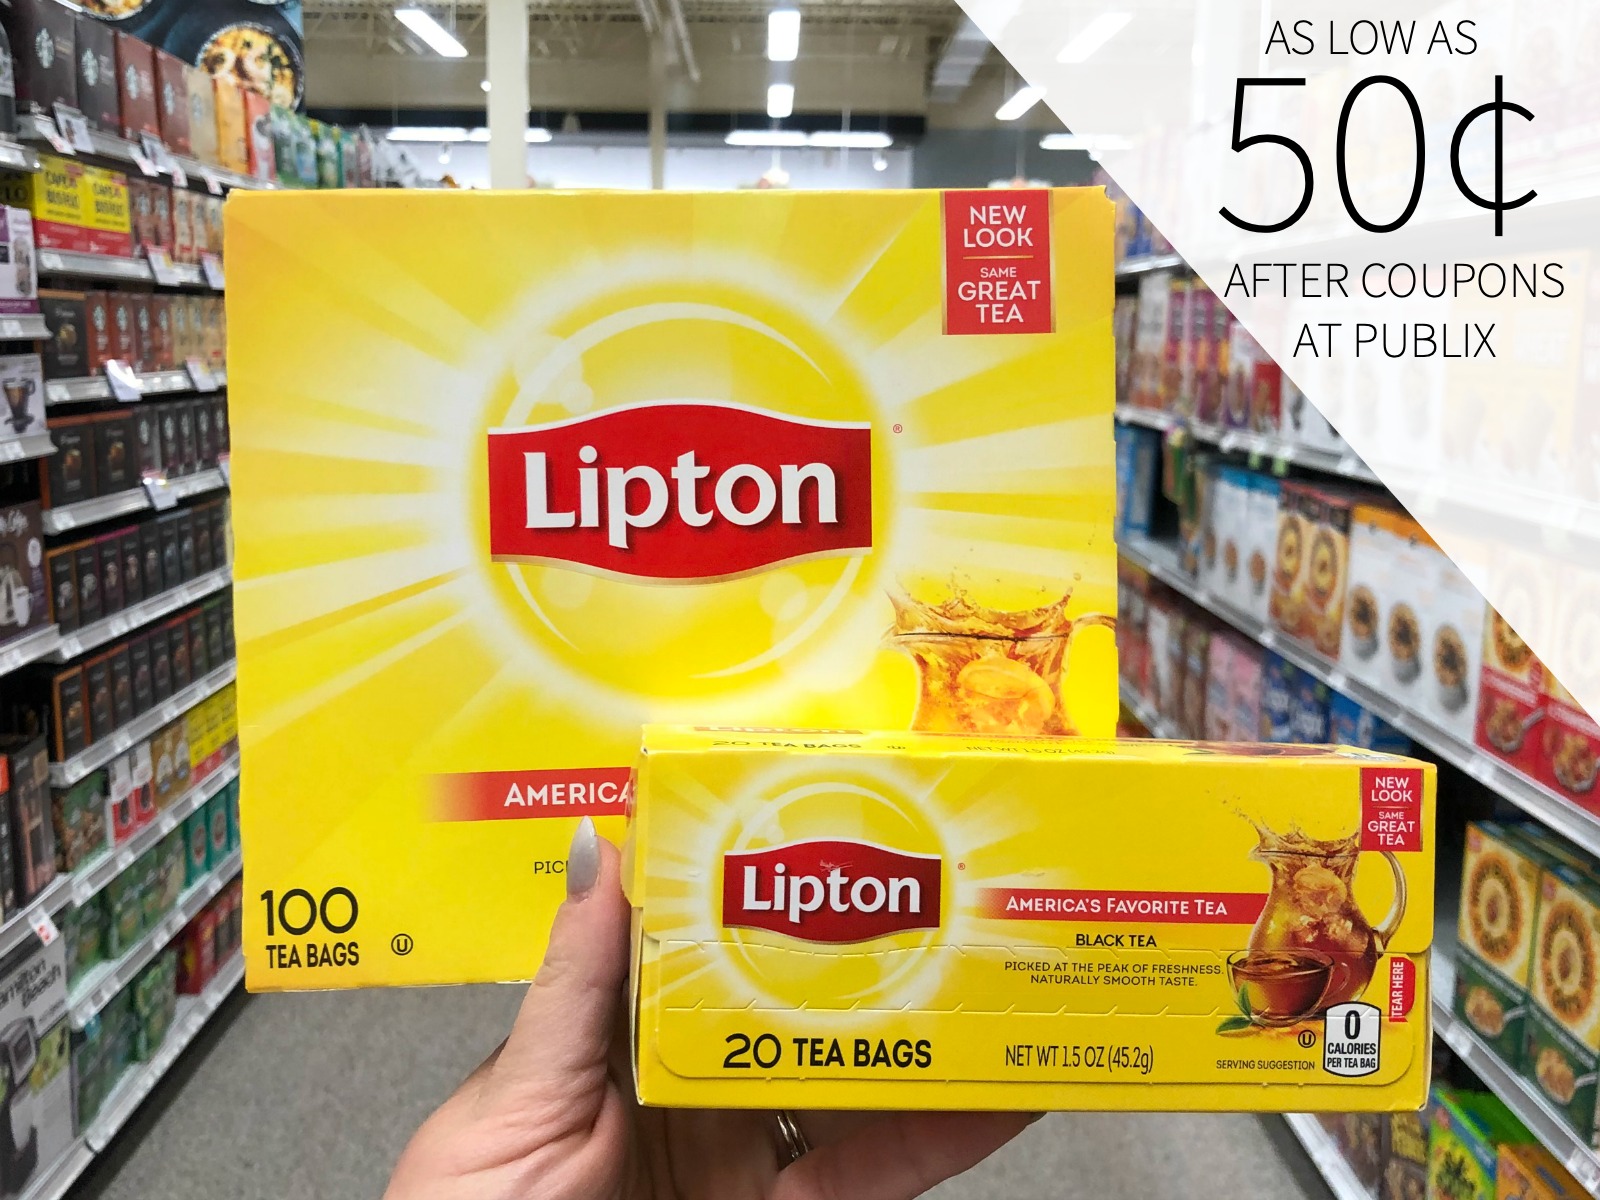 Amazing Deals On Lipton Tea At Publix – Stock Up For The Holidays!